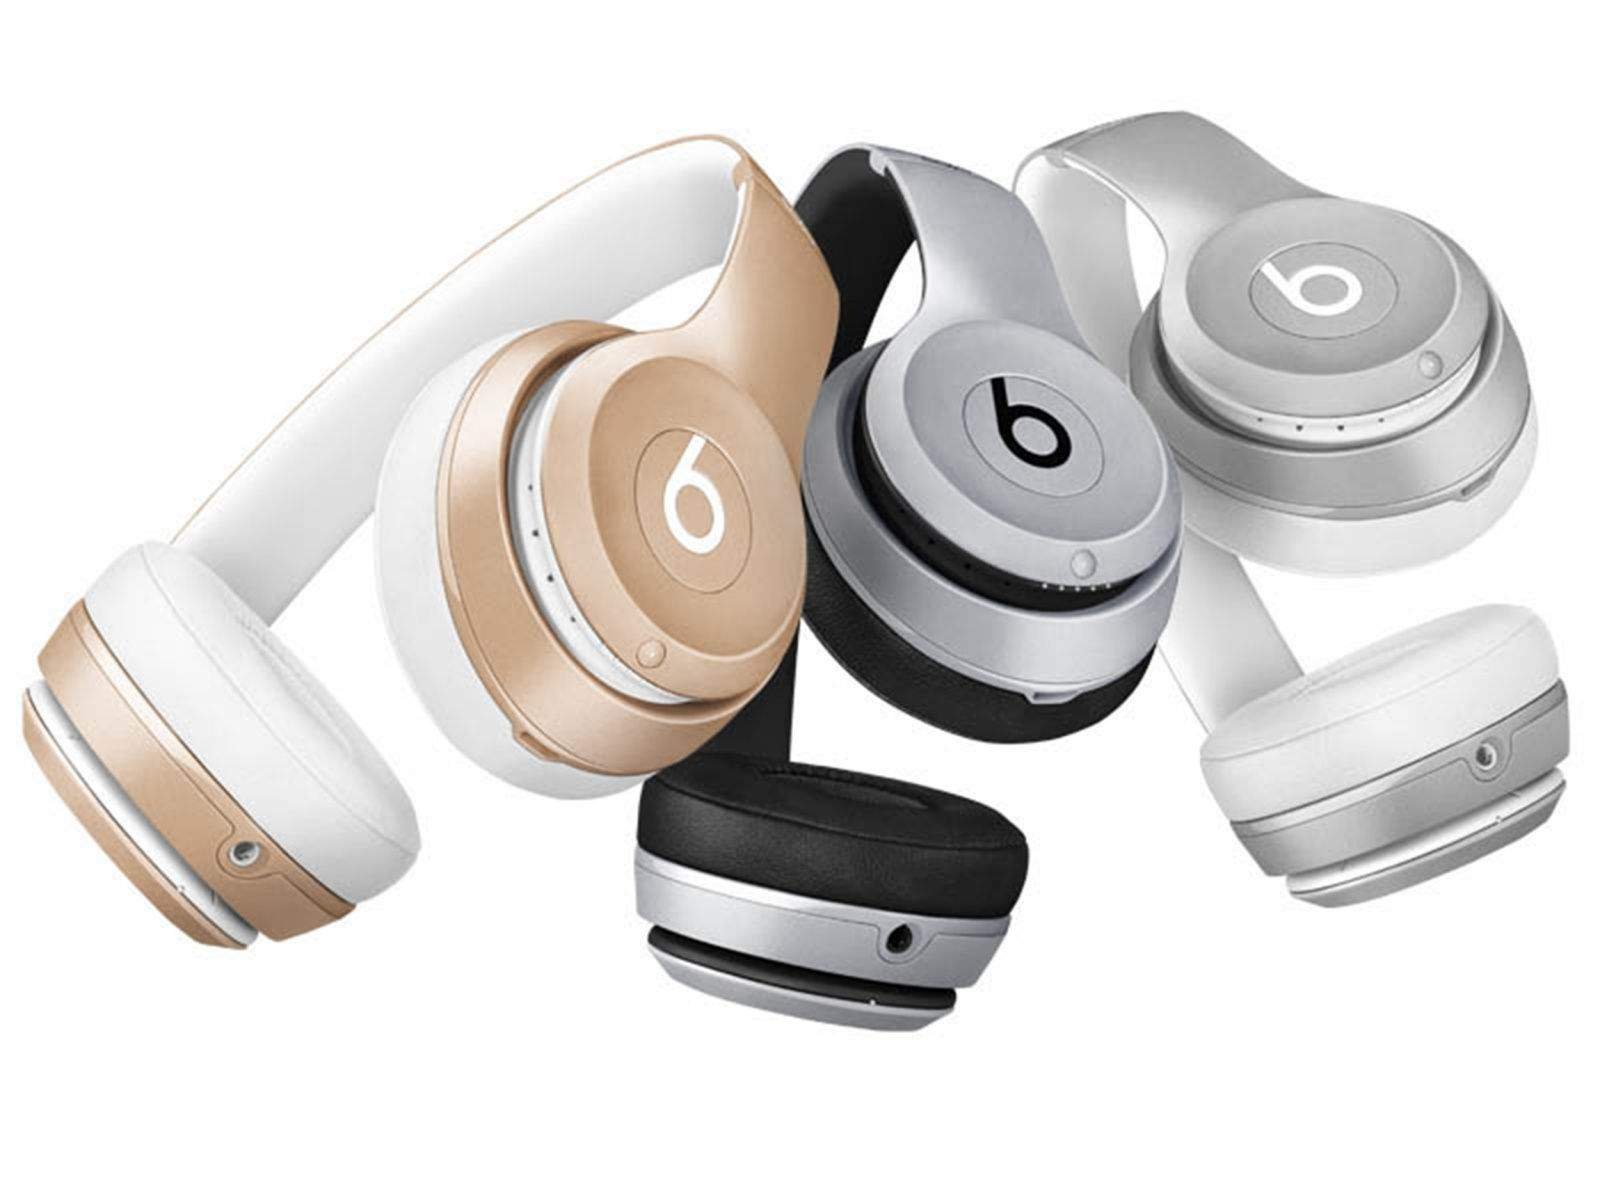 Apple-Beats deal remains a mystery 